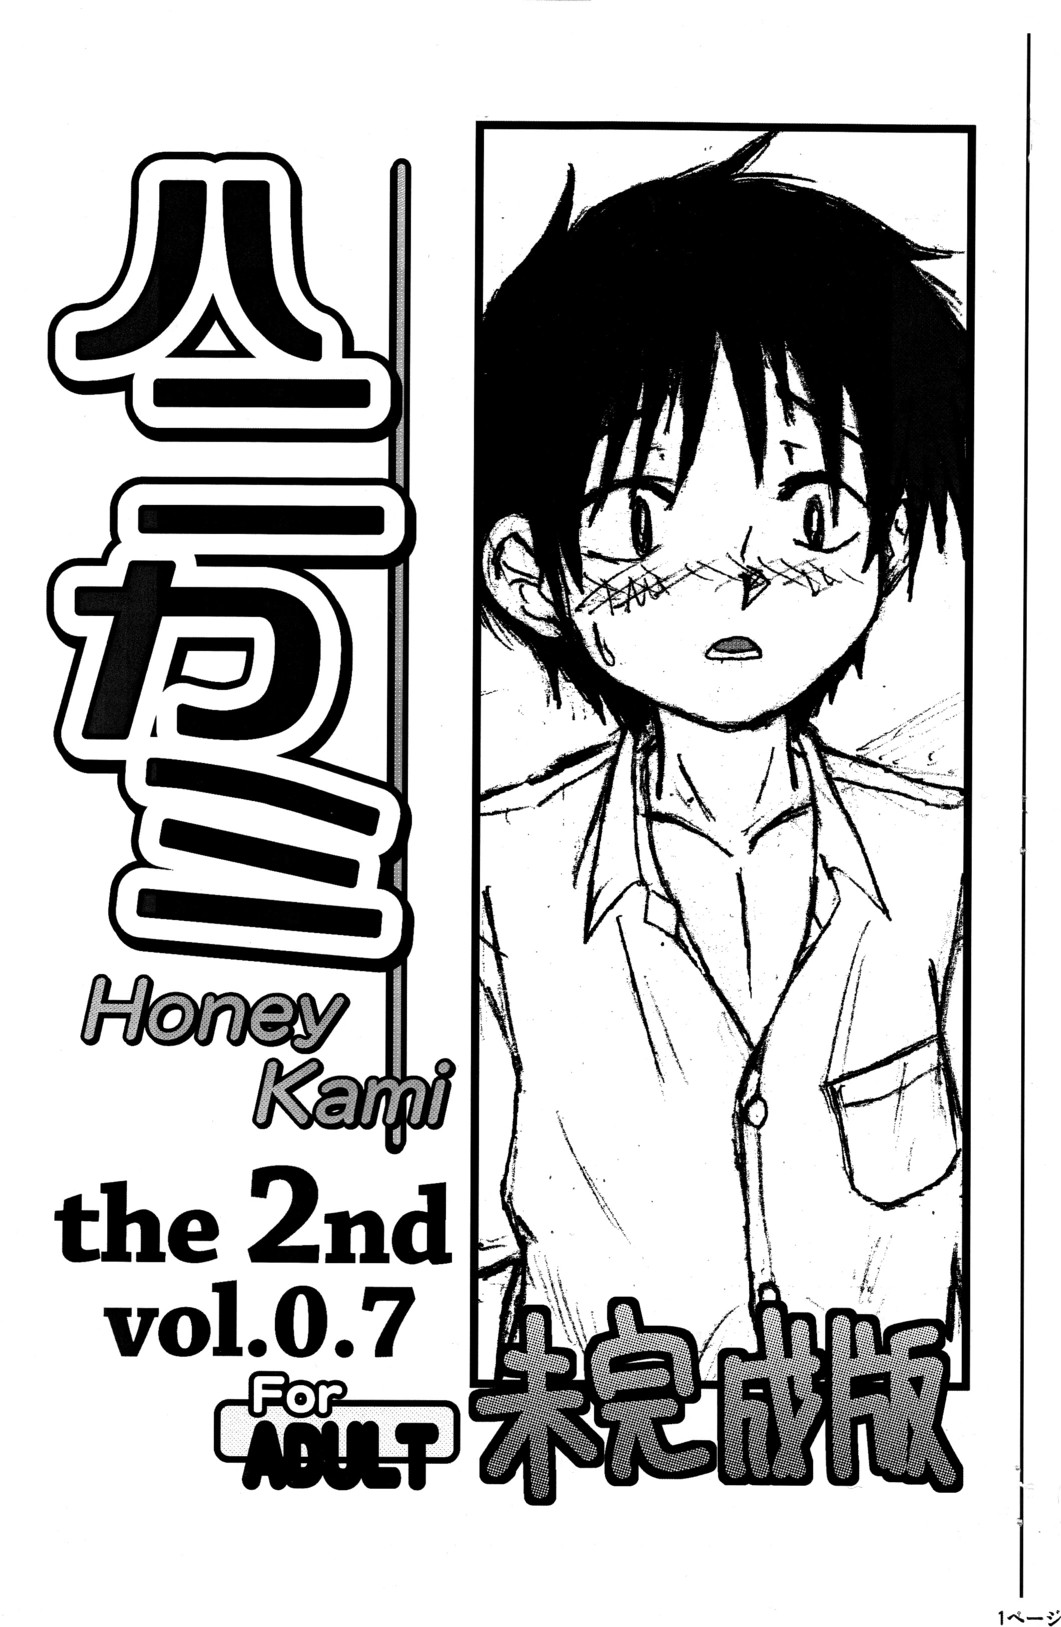 Crow (Theory of Heaven) - Honey Kami the 2nd vol.0.7 page 1 full